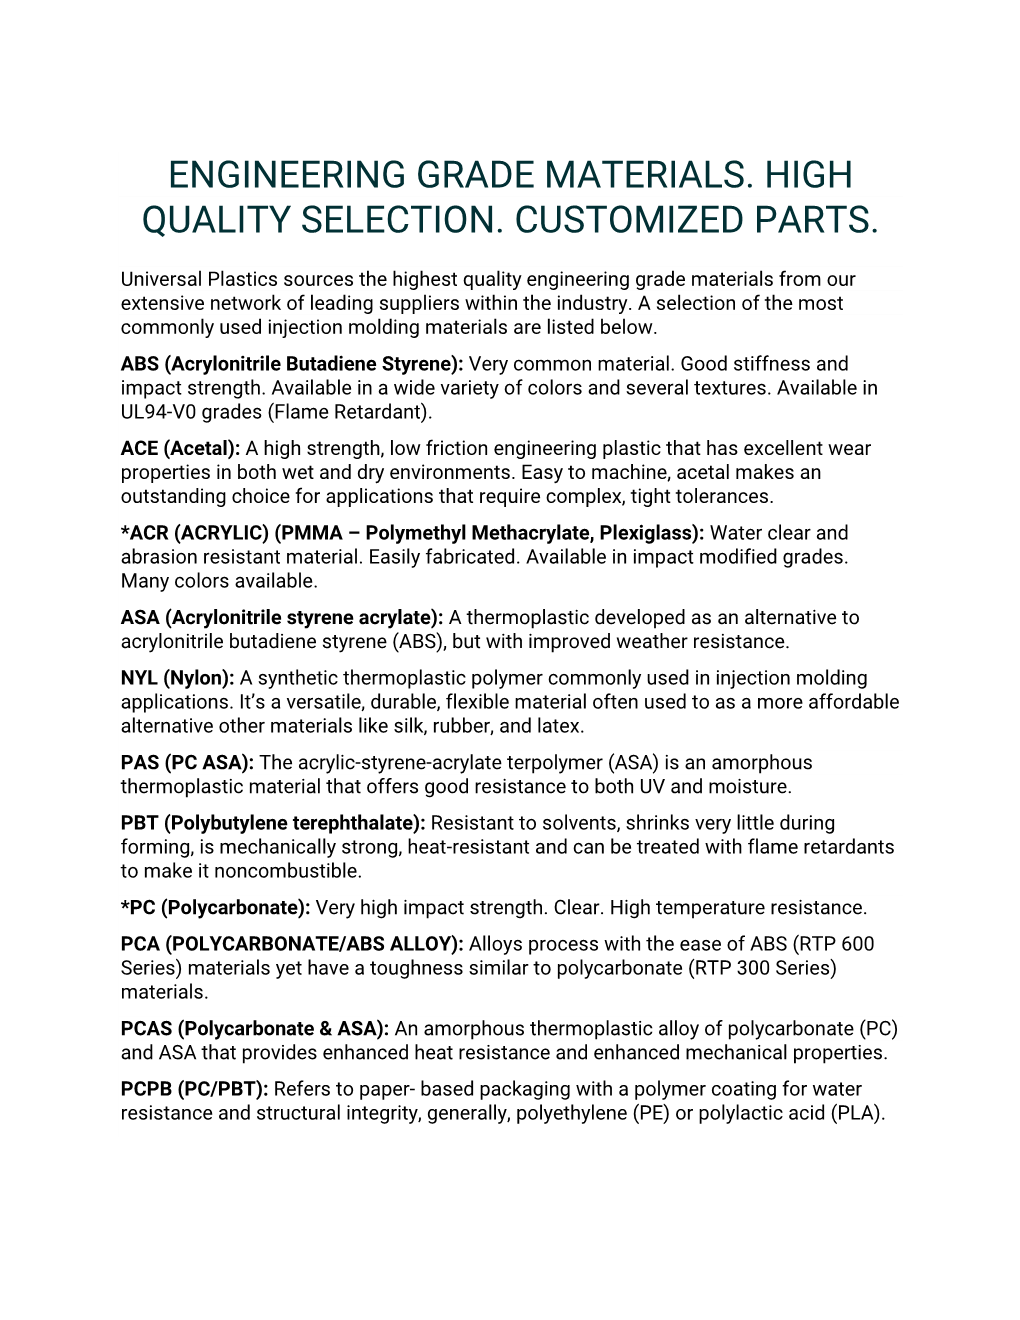 Engineering Grade Materials. High Quality Selection